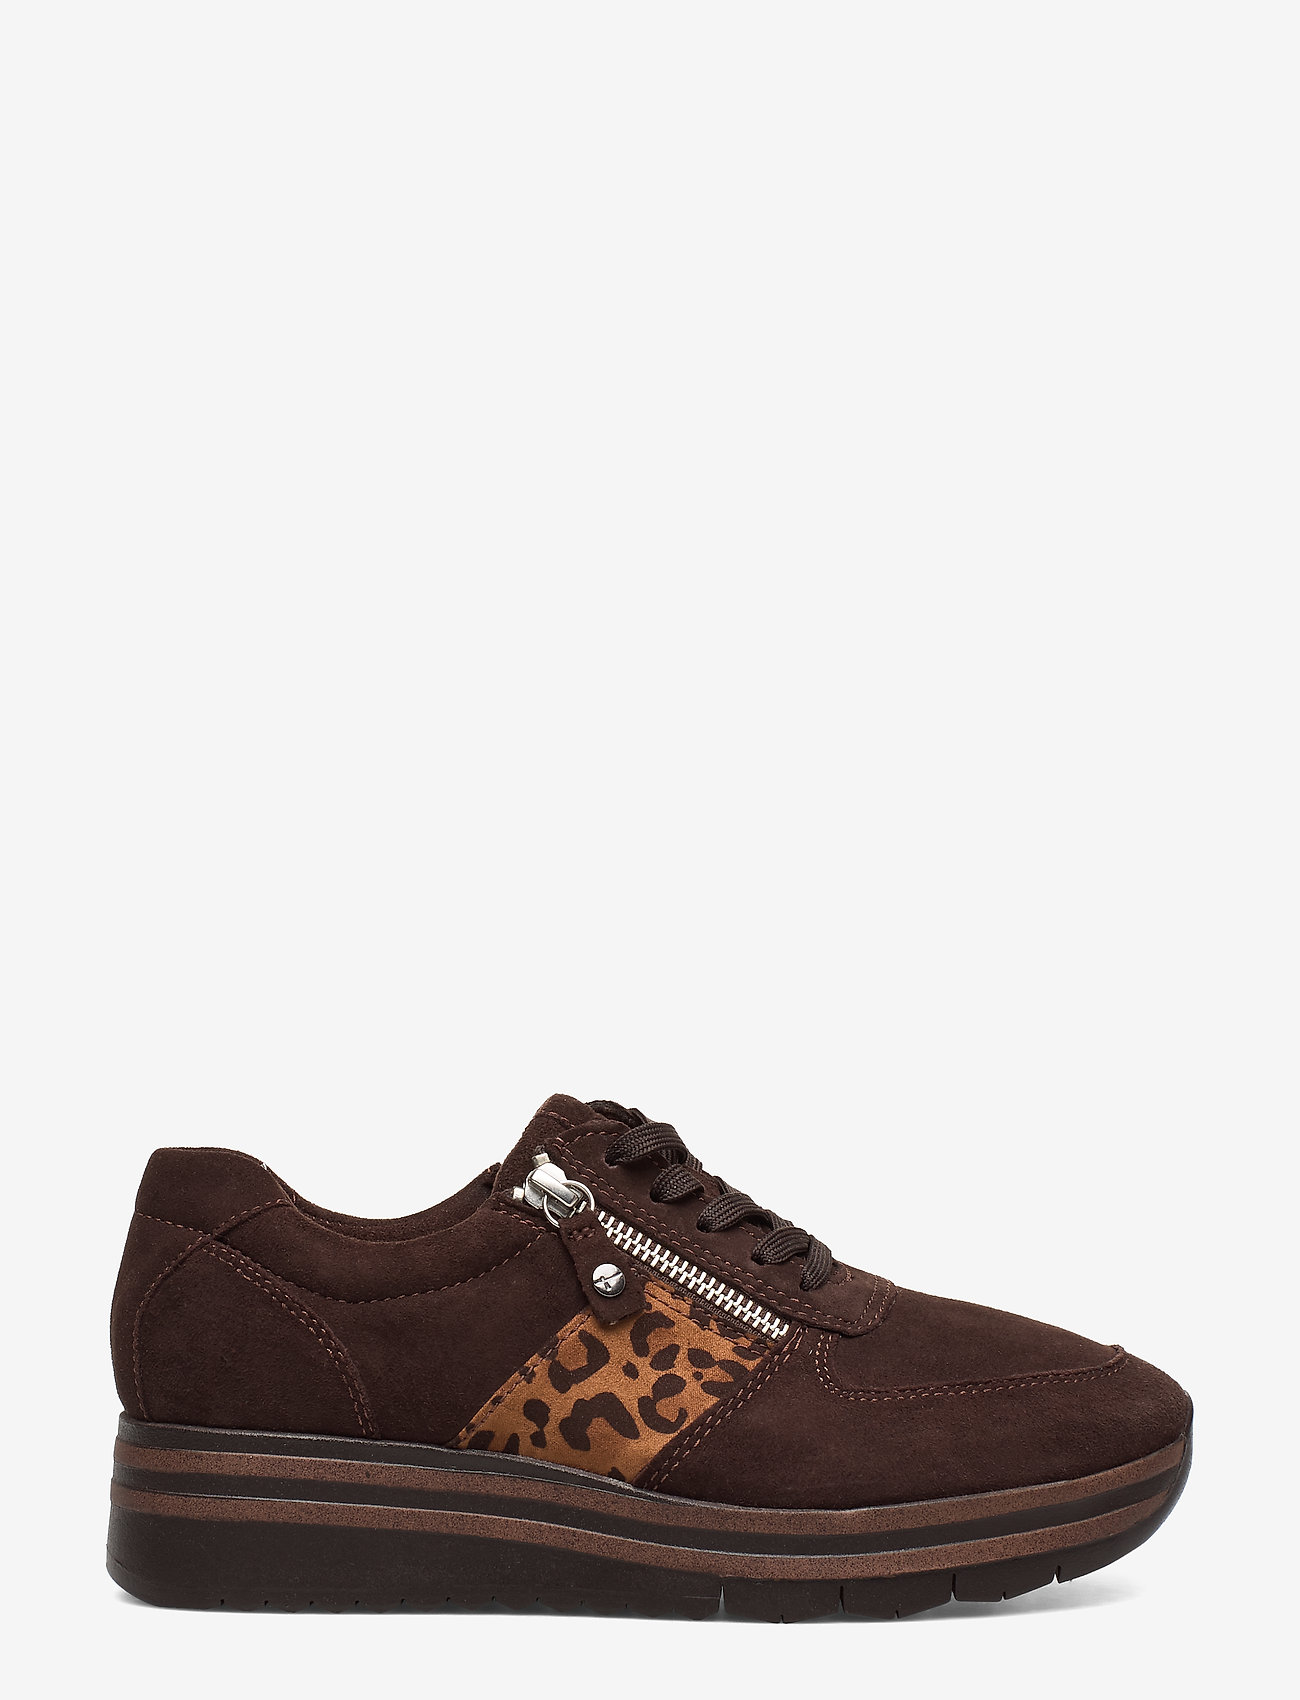 Tamaris - Woms Lace-up - low top sneakers - mocca/leo - 1